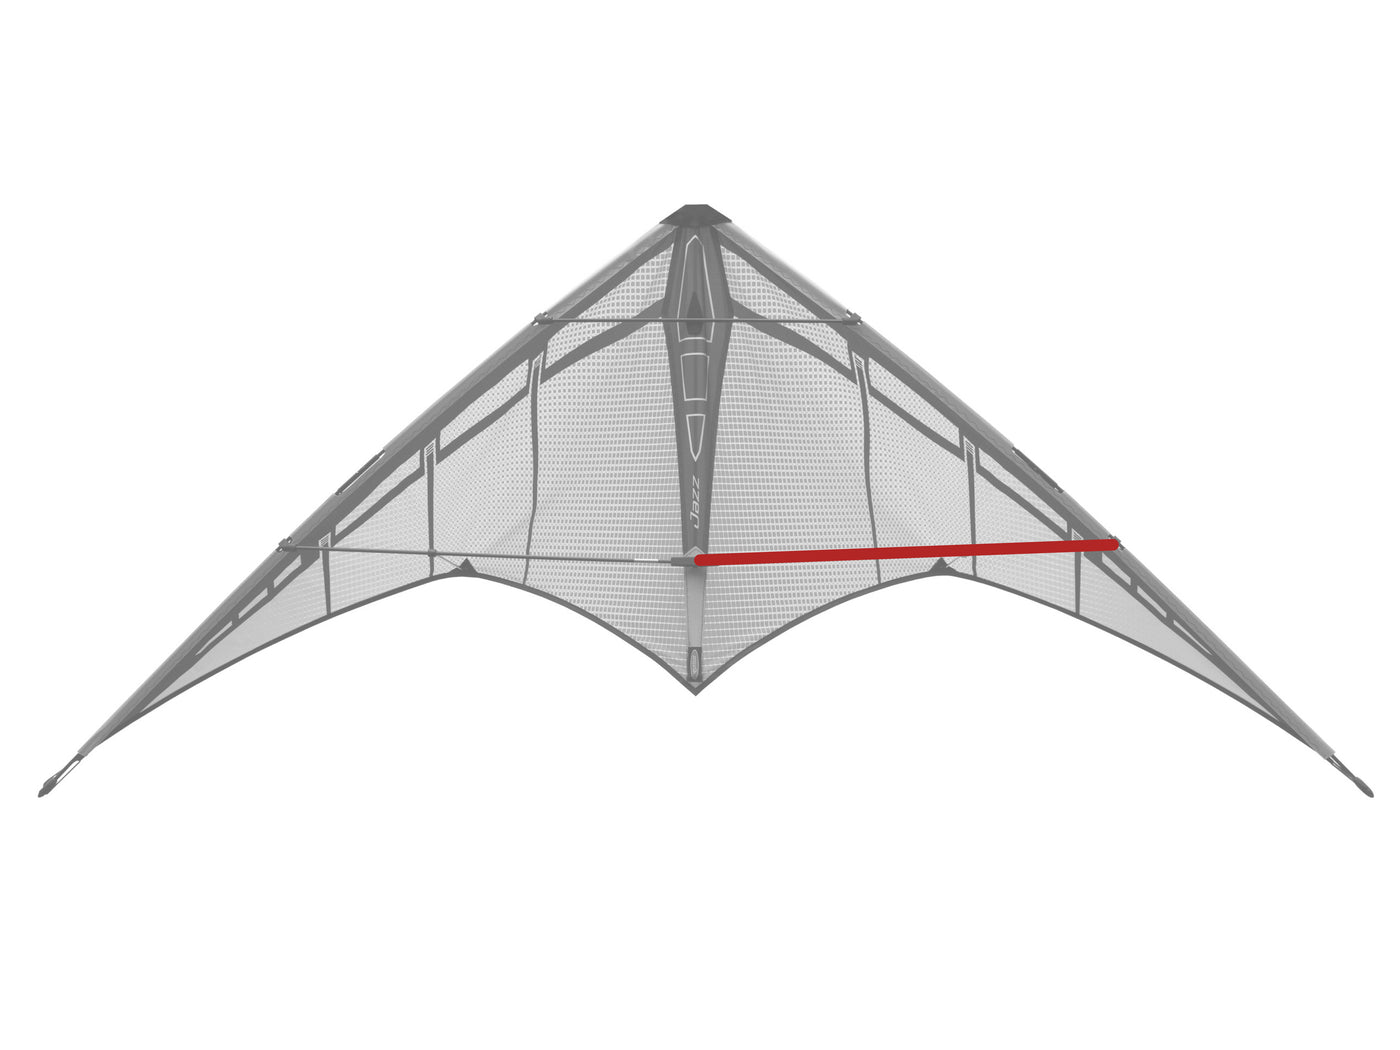 Diagram showing location of the Jazz Lower Spreader on the kite.